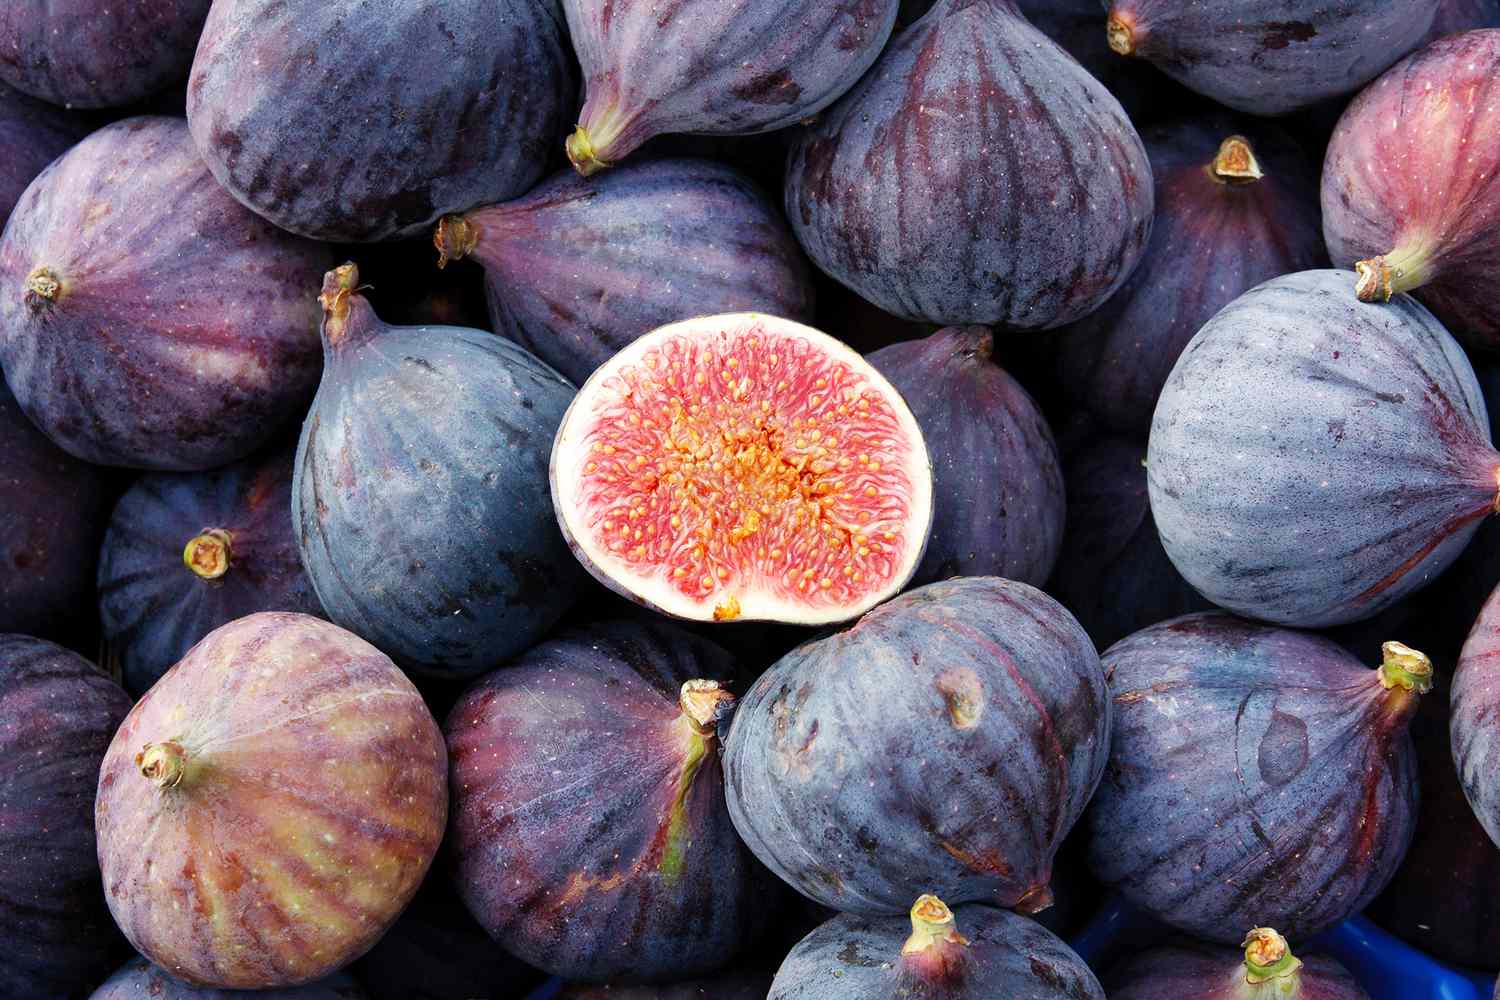 A close up shot of a pile of figs, one is cut open